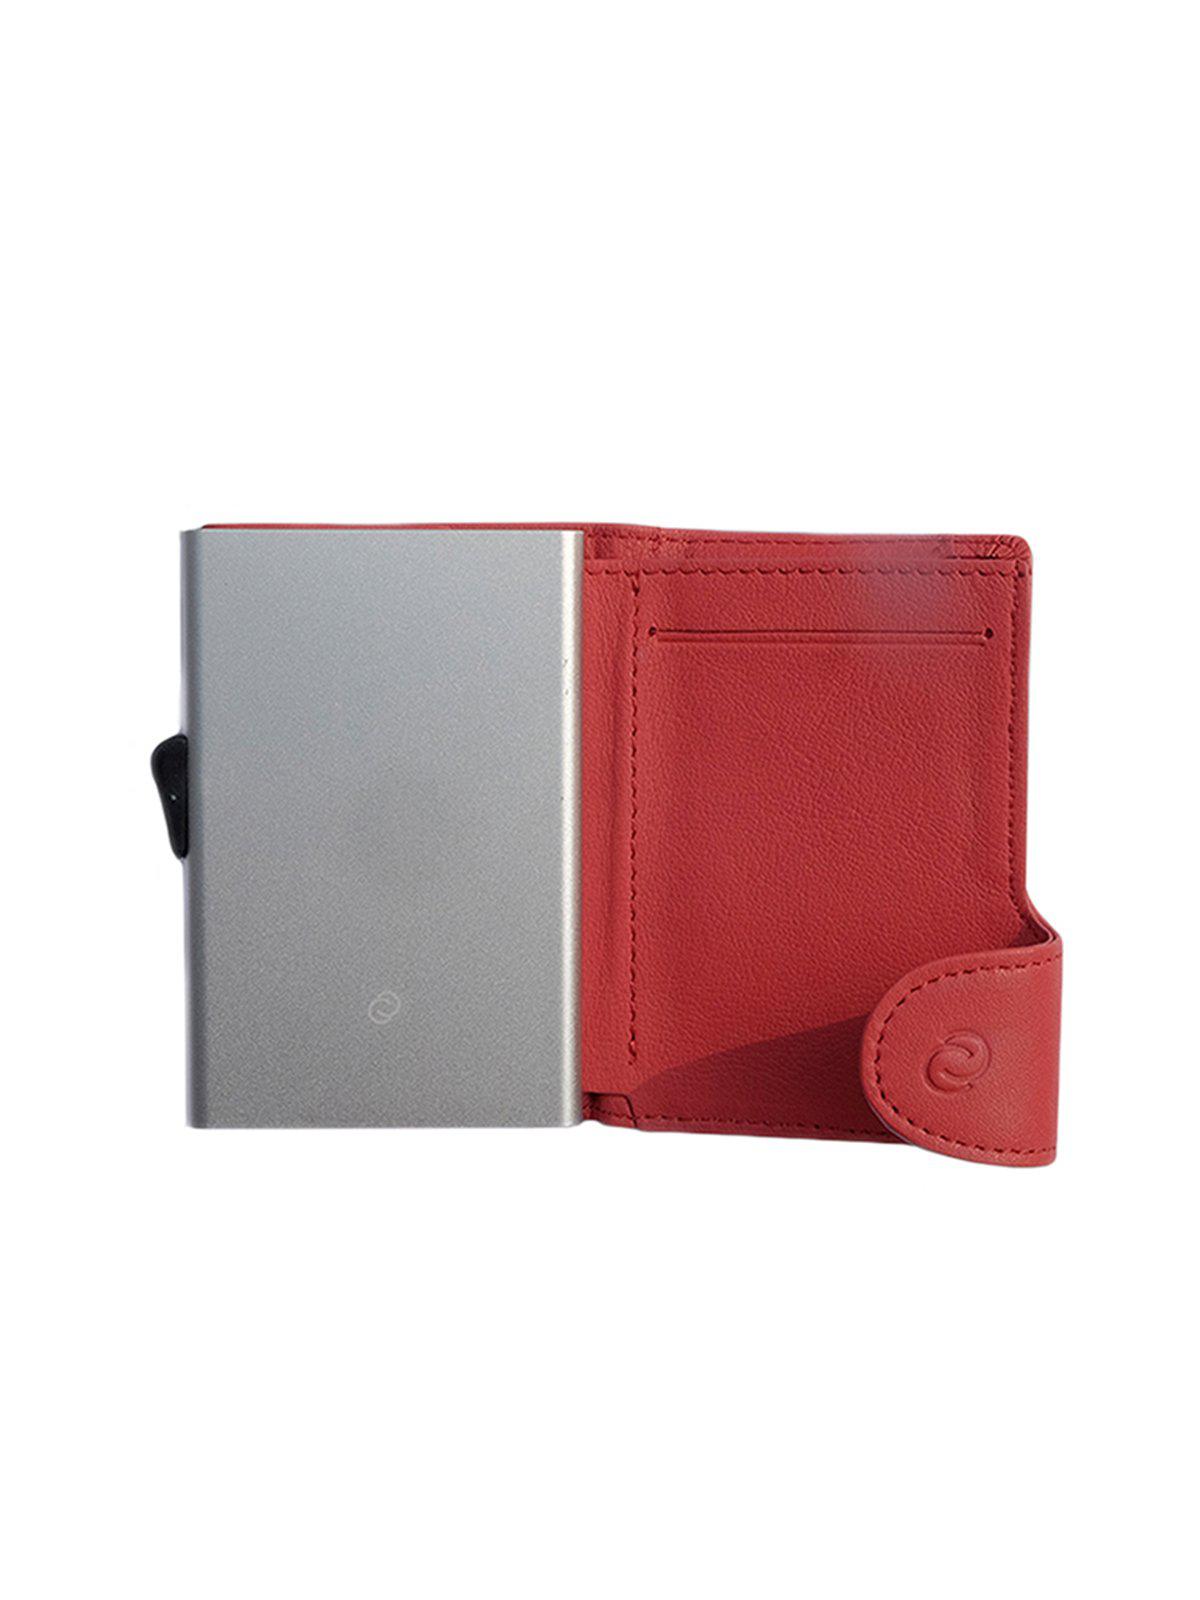 C-Secure Italian Leather RFID Wallet Rubino - MORE by Morello Indonesia